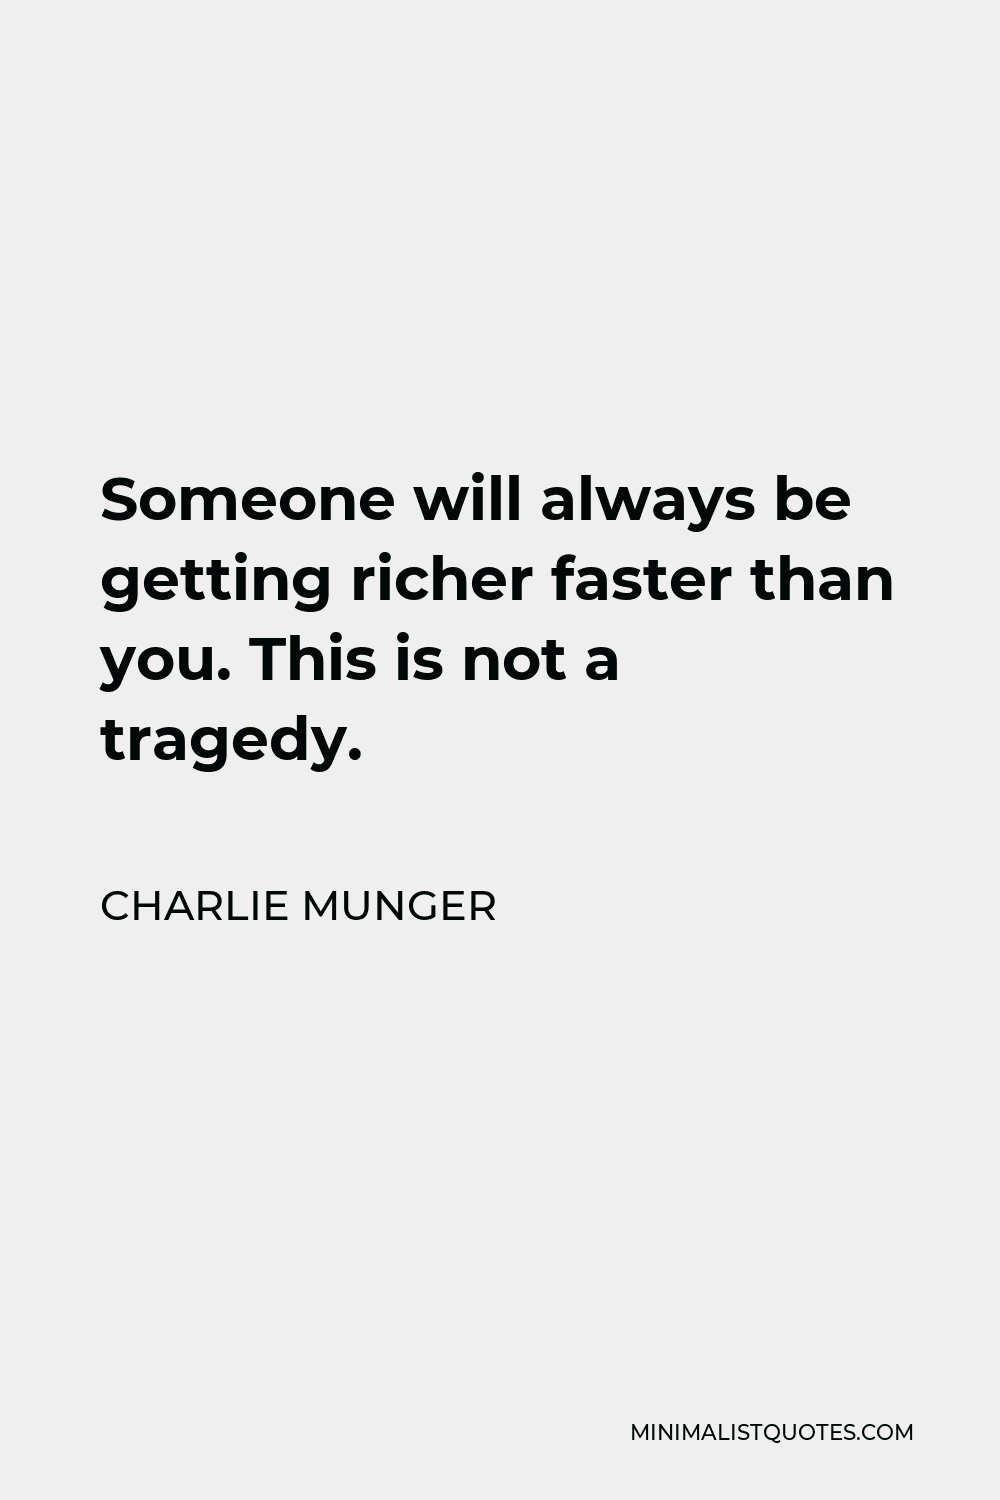 Charlie Munger Quote - Someone will always be getting richer faster than you. This is not a tragedy.